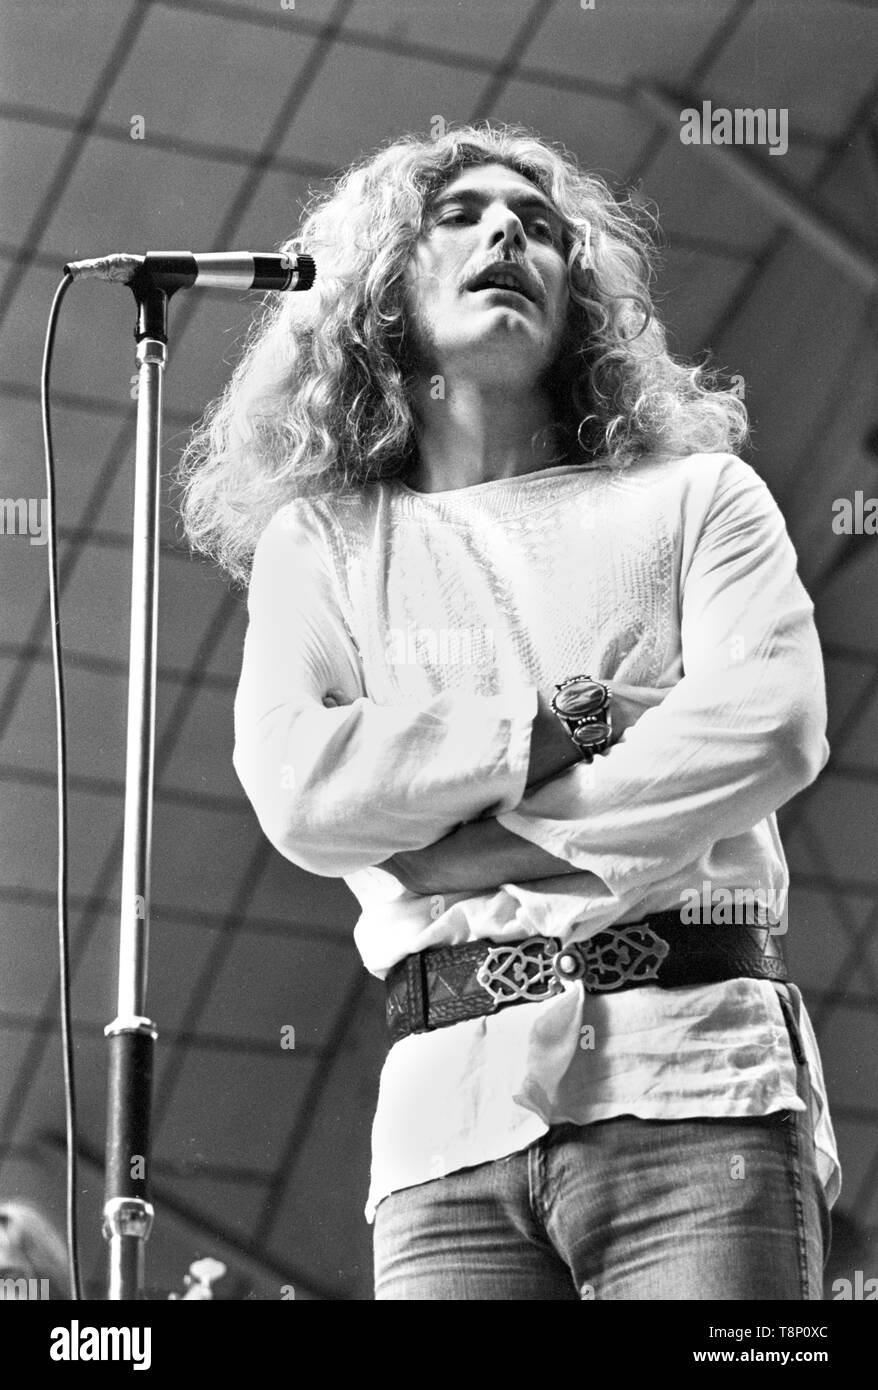 Amsterdam, Netherlands - MAY 27: Robert Plant of Led Zeppelin during sound check on stage at Oude Rai on 27th May 1972 in Amsterdam, Netherlands. (Photo by Gijsbert Hanekroot) Stock Photo